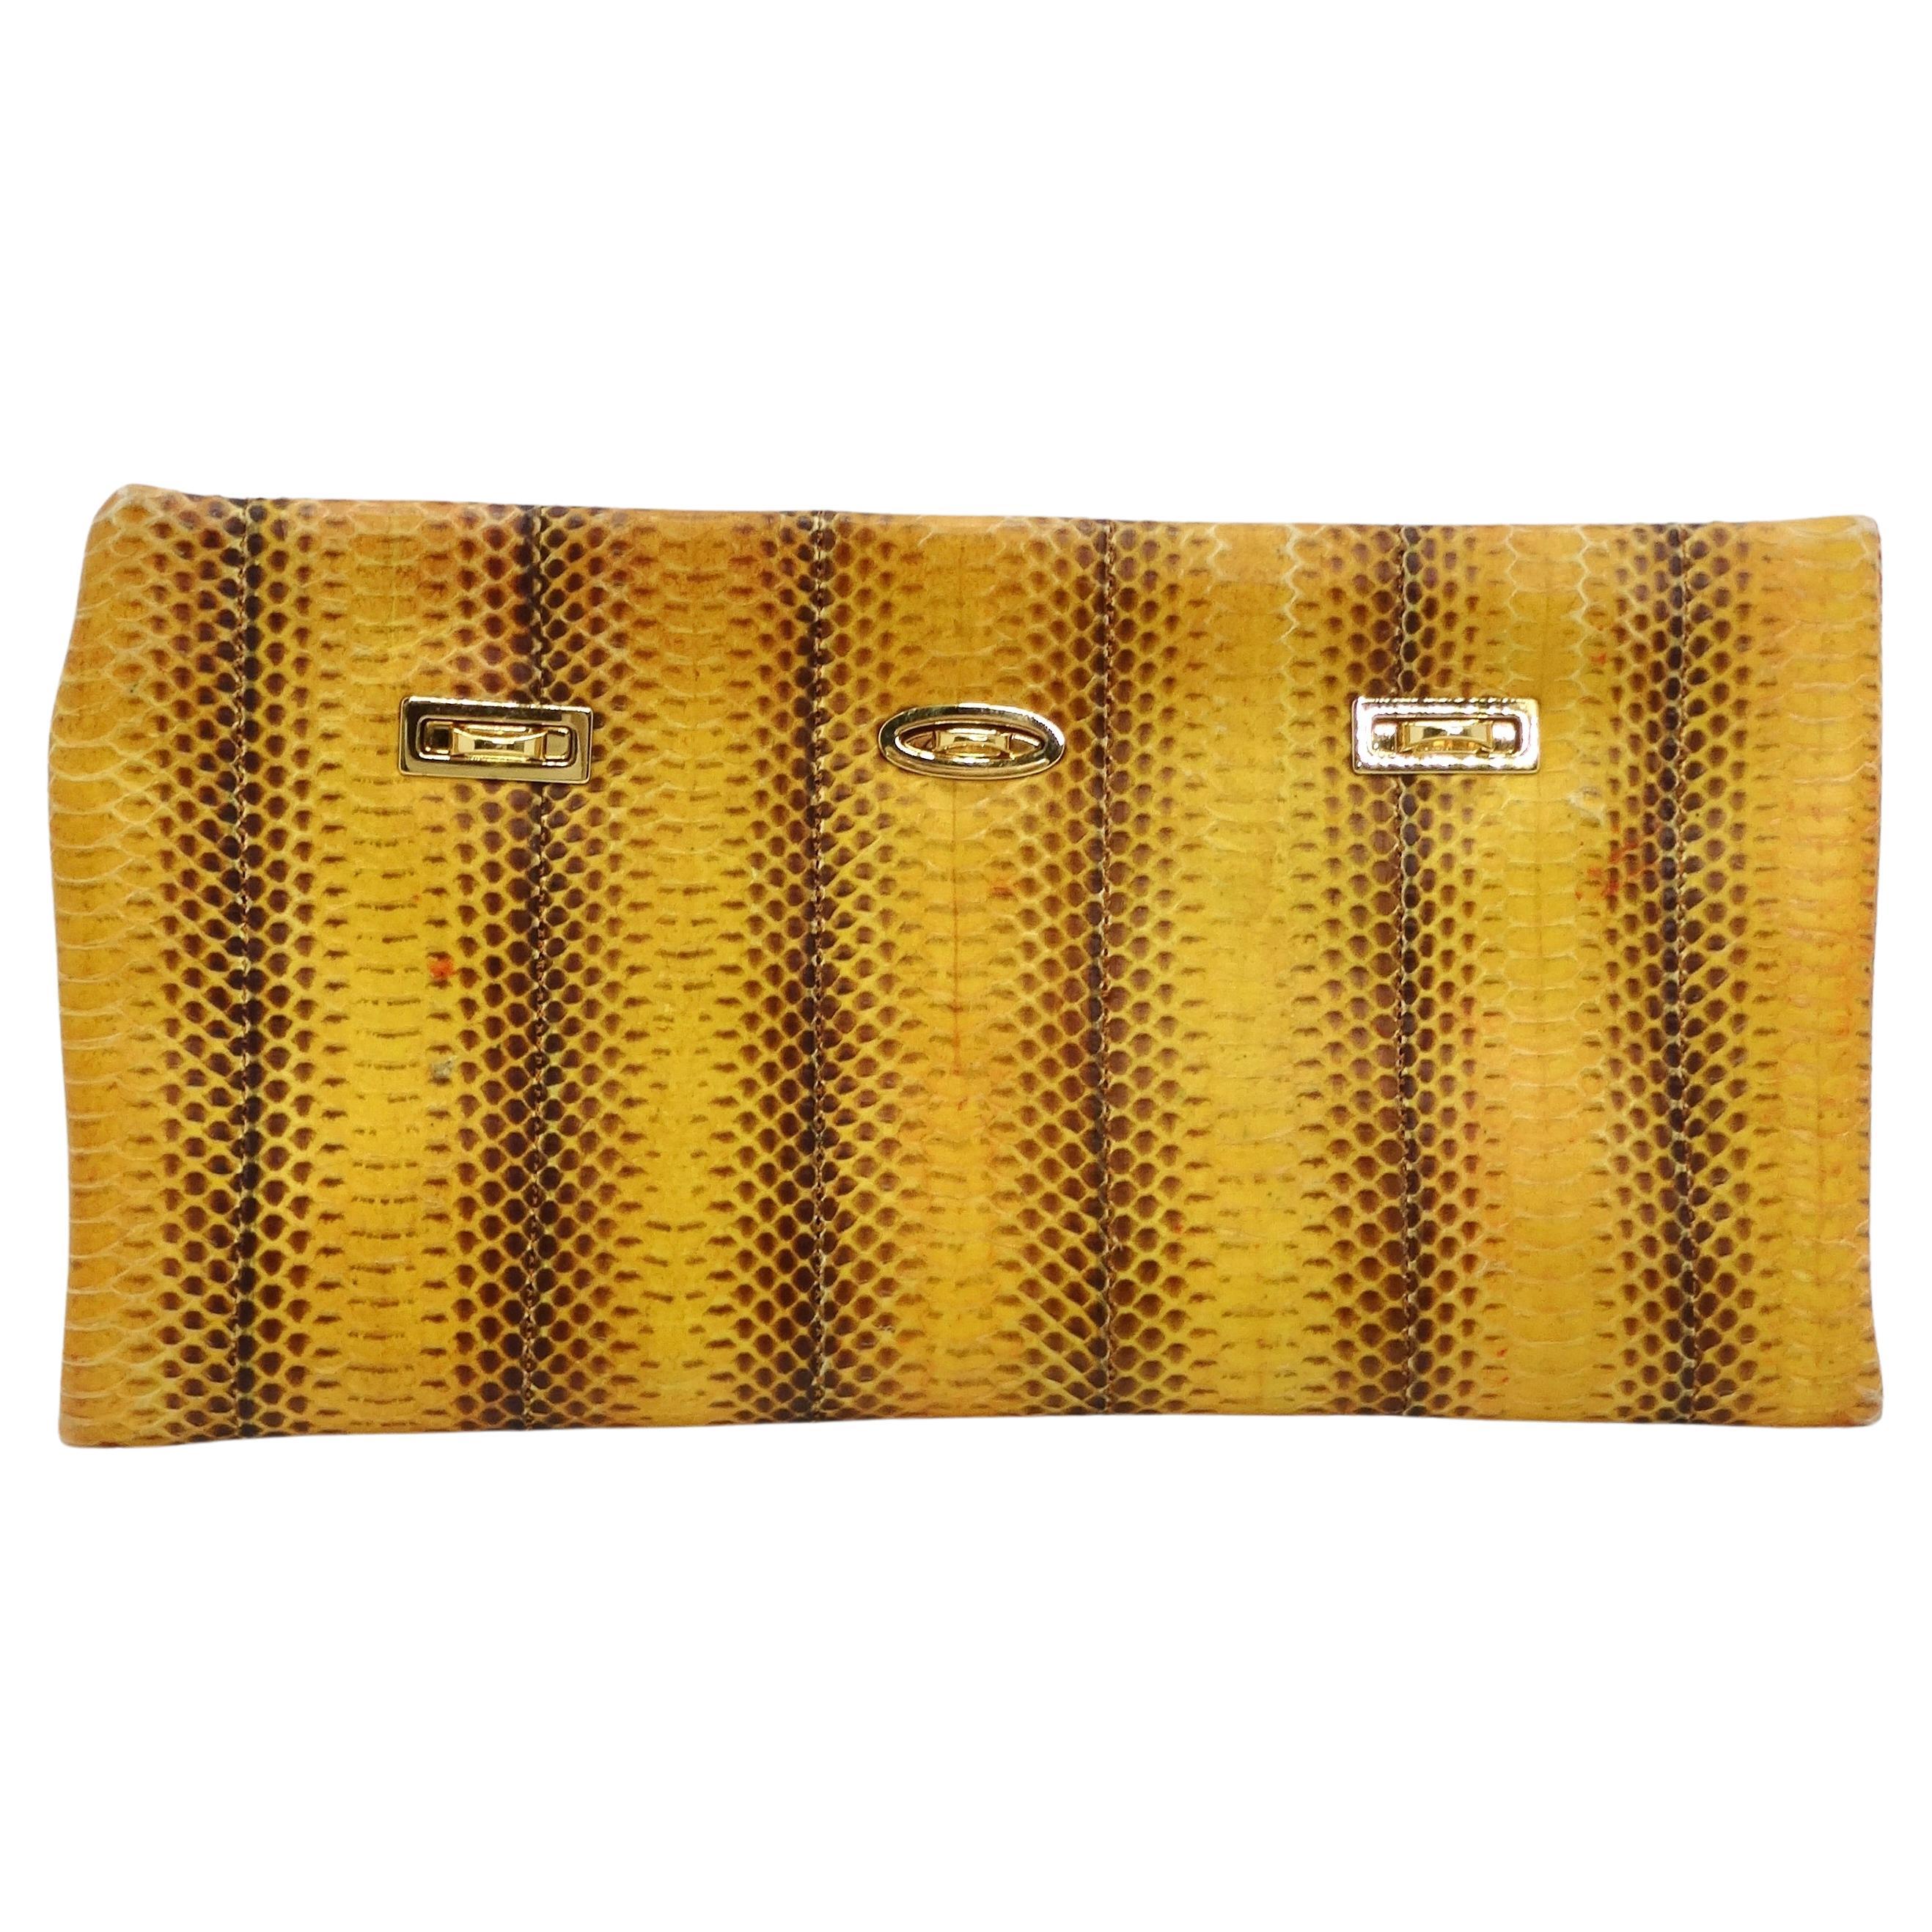 VBH 1980s Yellow Snakeskin Embossed Leather Clutch For Sale